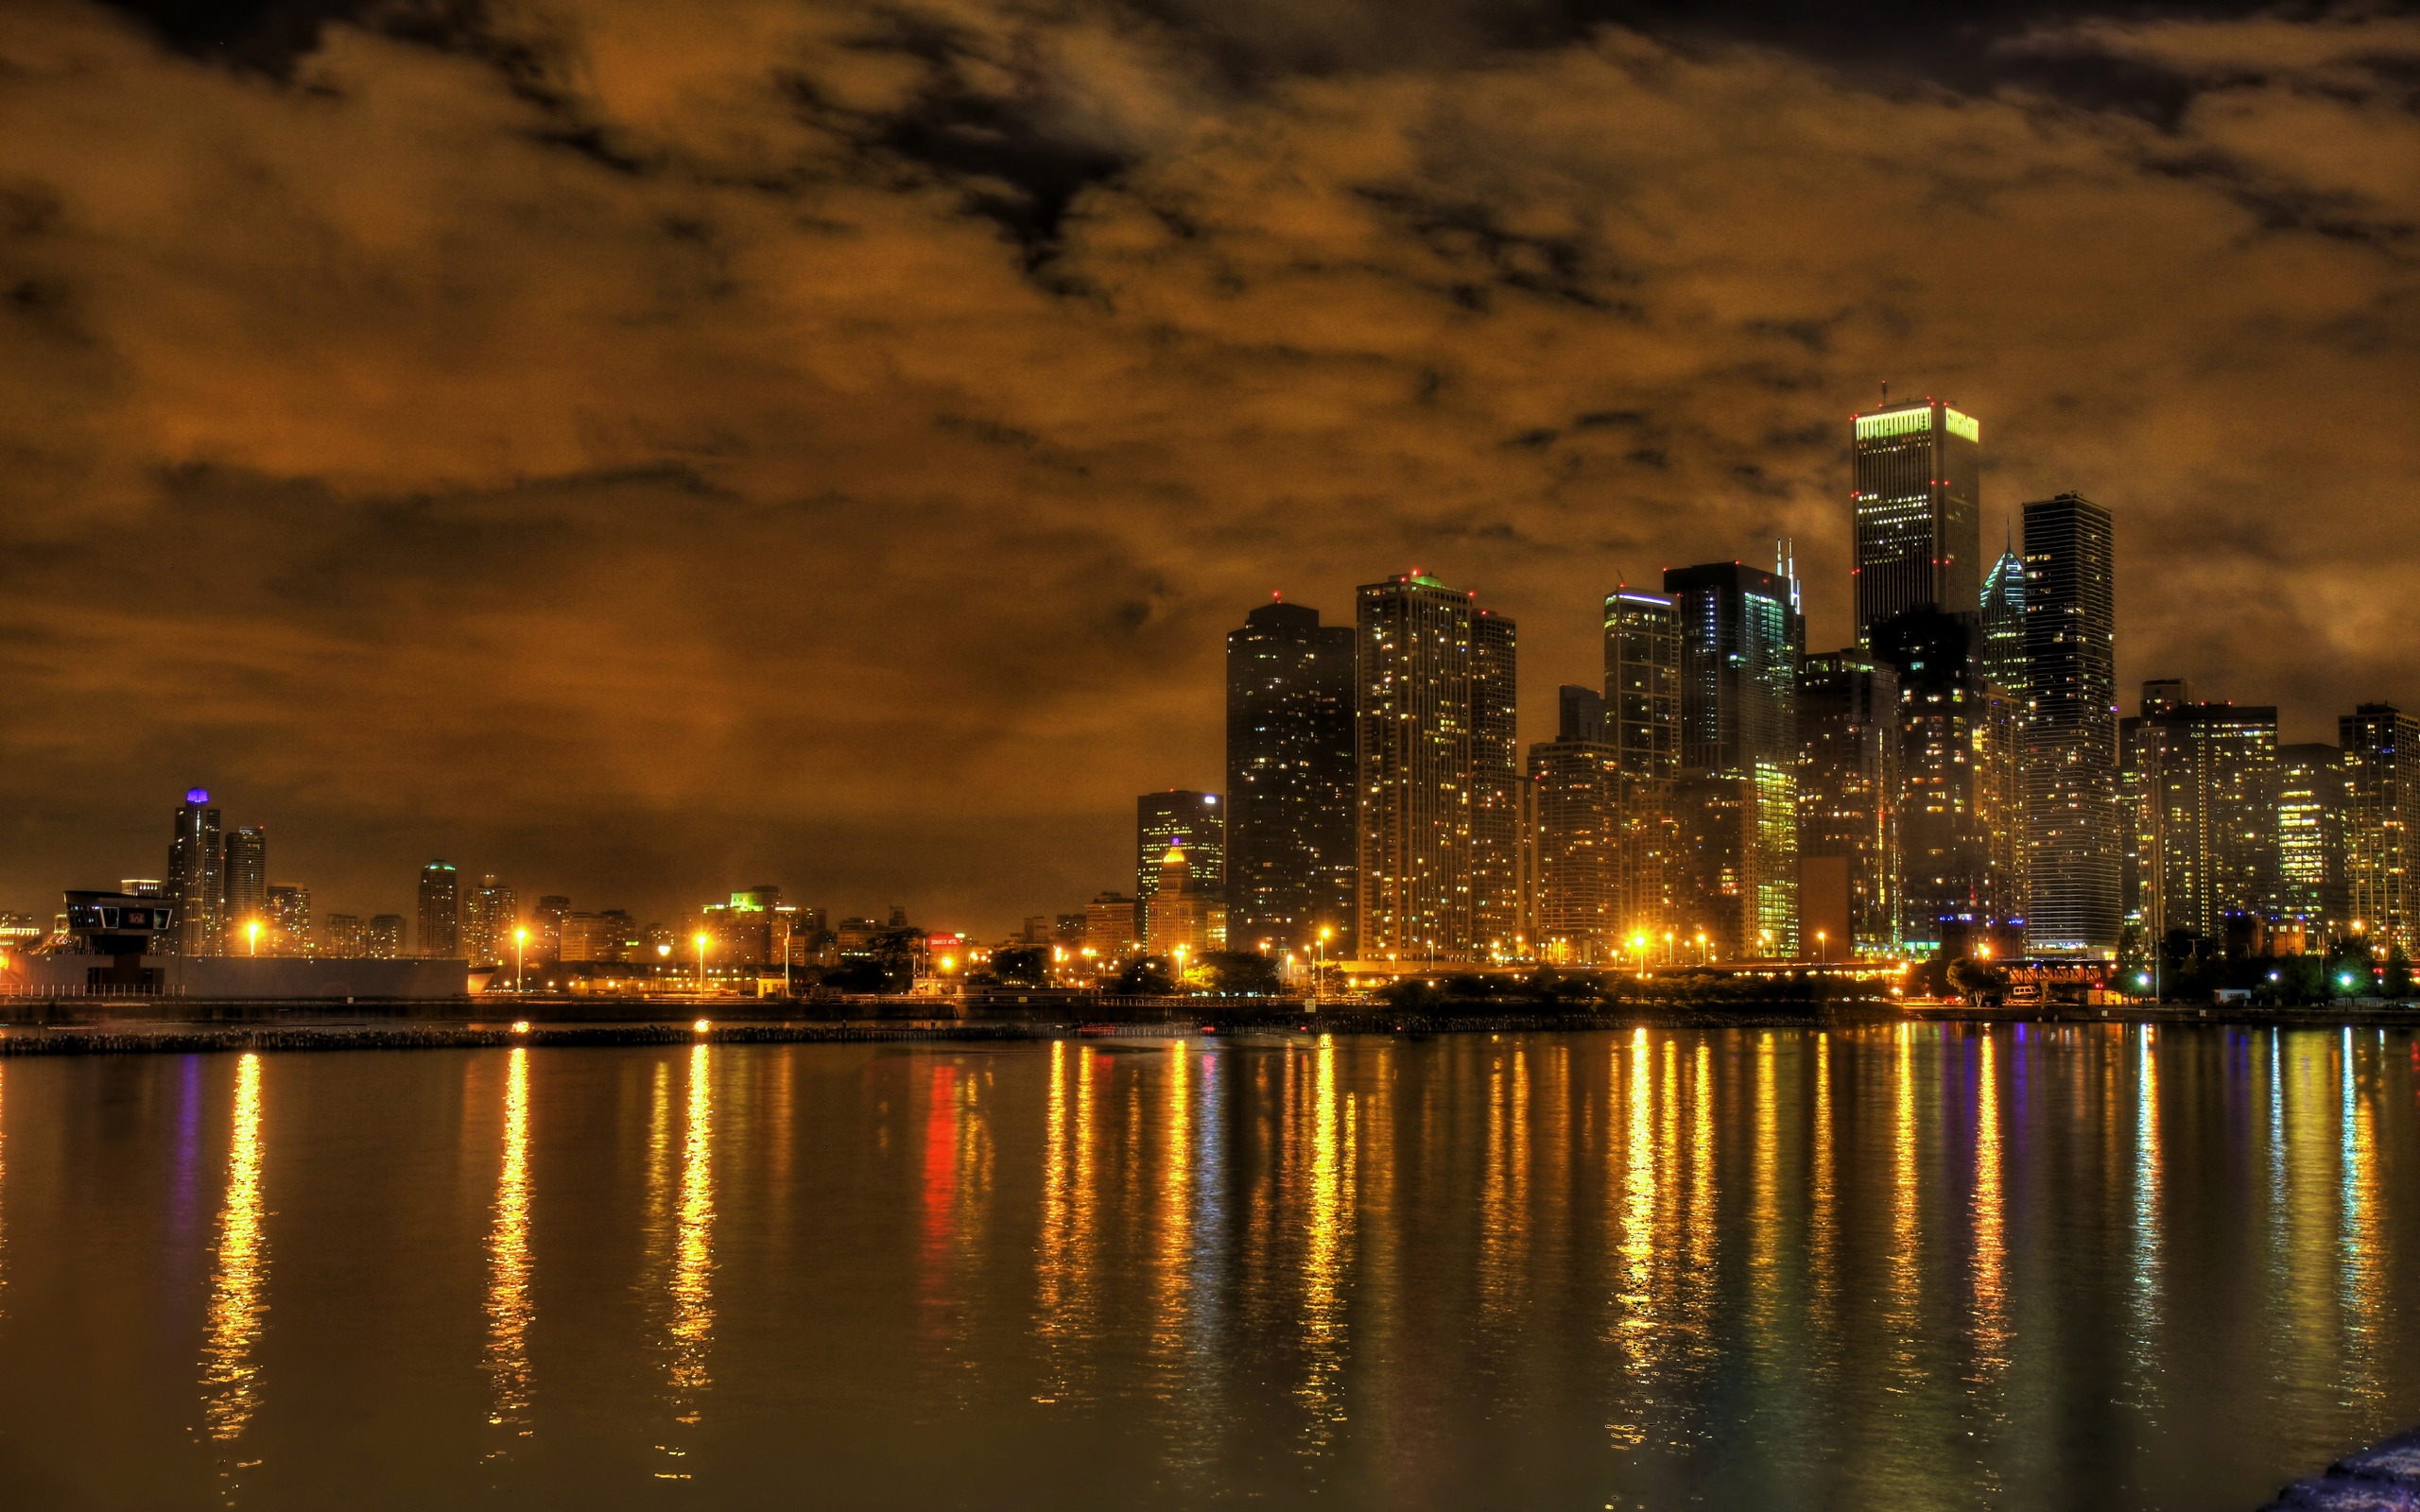 Man Made Chicago HD Wallpaper | Background Image